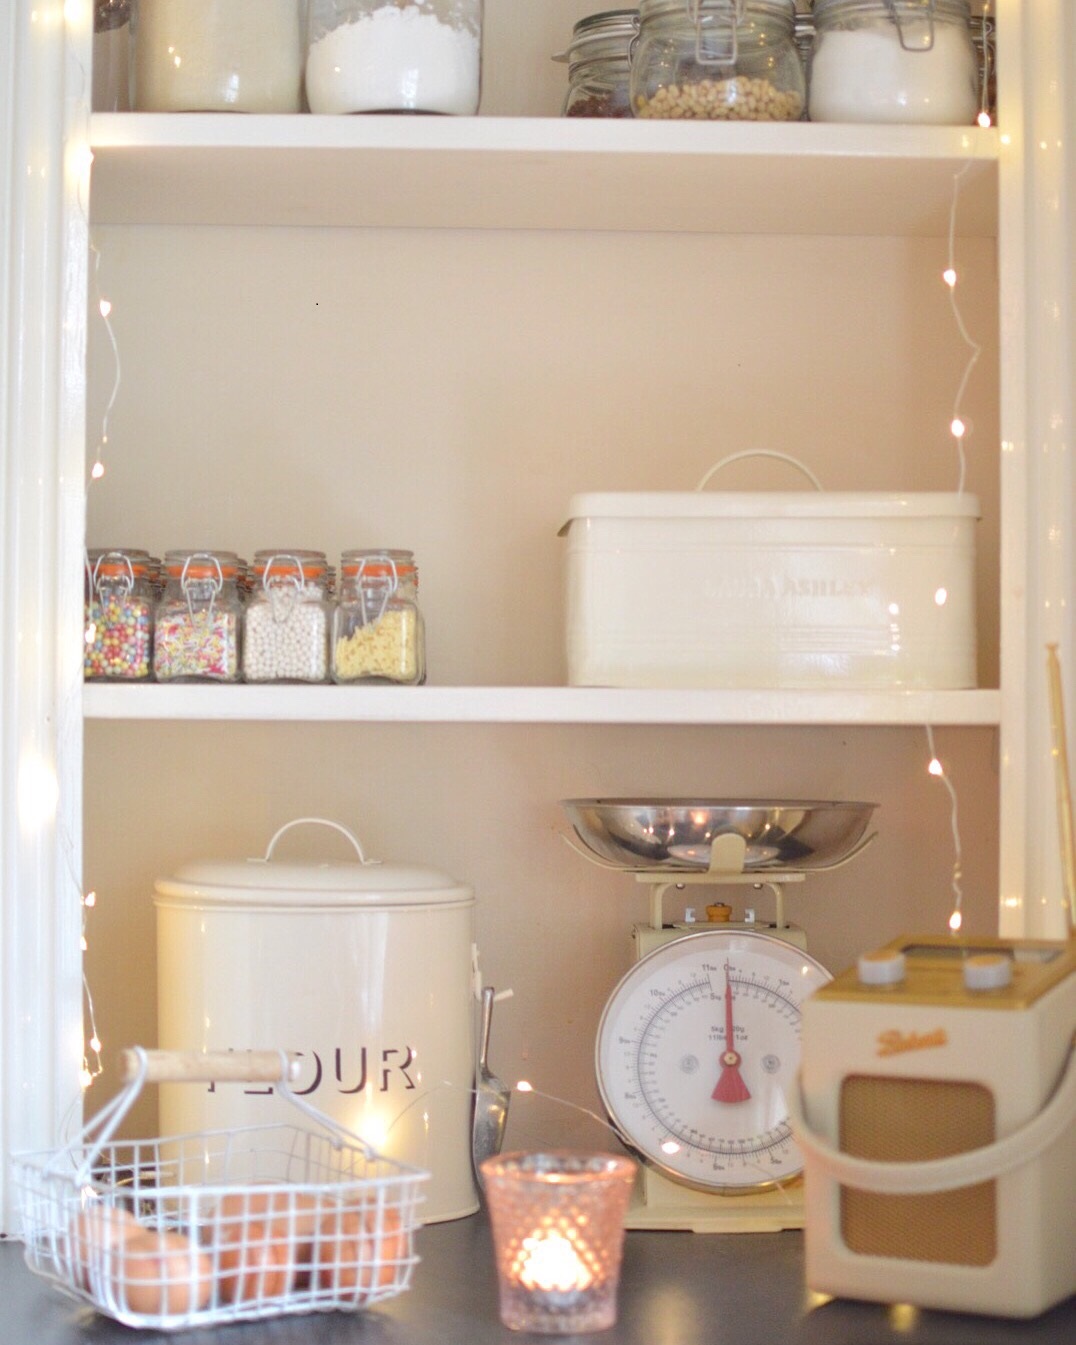 Spring Cleaning 101: 5 Tips for Quick Pantry Organization